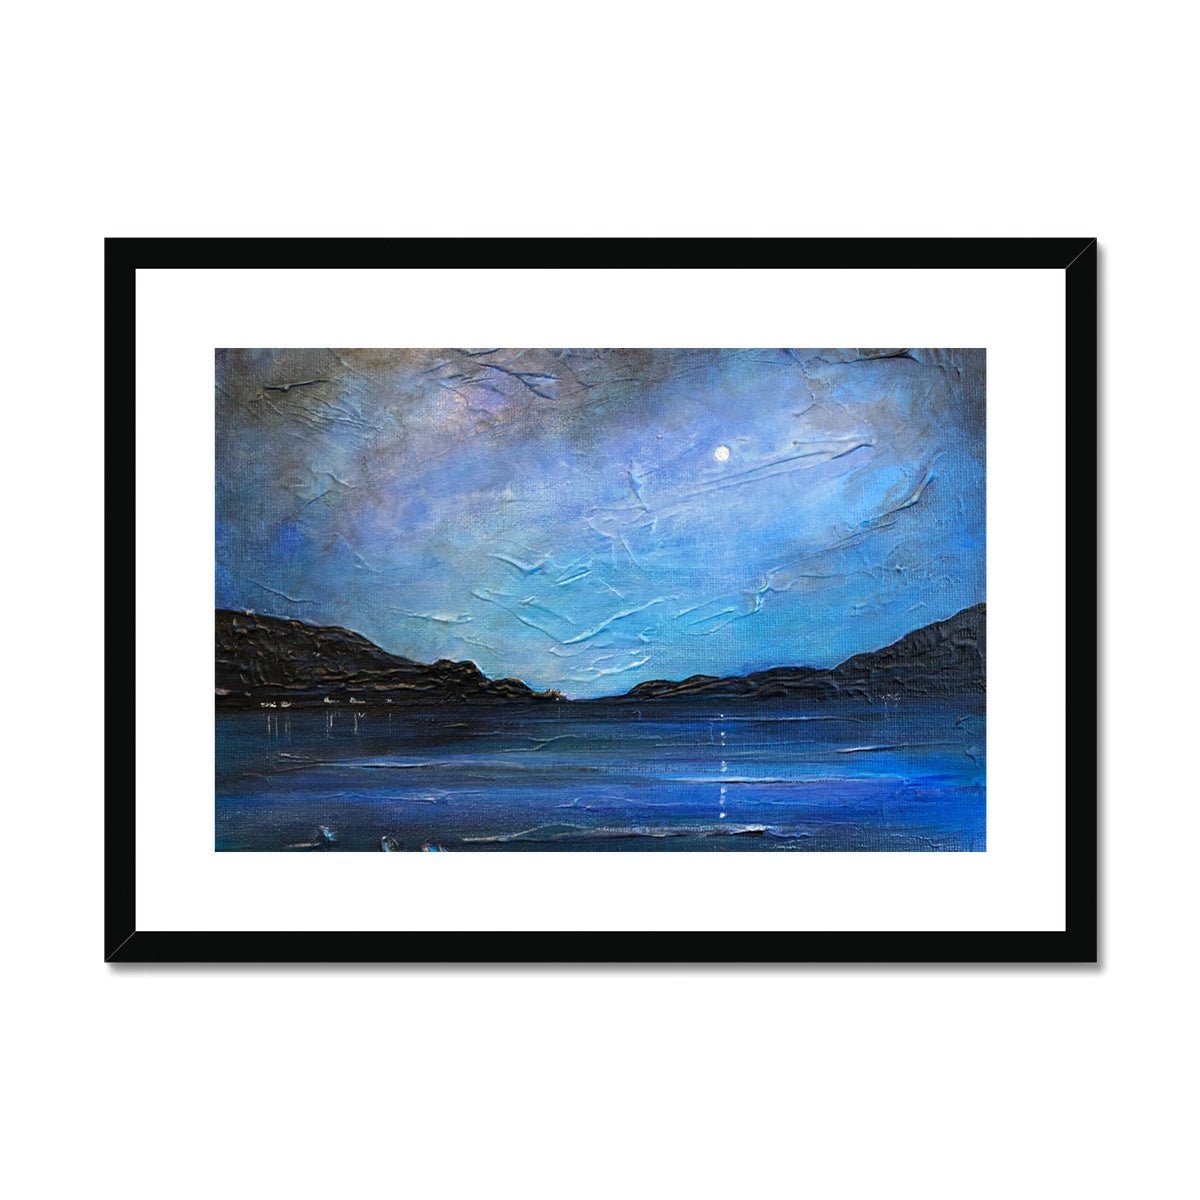 Loch Ness Moonlight Painting | Framed & Mounted Prints From Scotland-Framed & Mounted Prints-Scottish Lochs & Mountains Art Gallery-A2 Landscape-Black Frame-Paintings, Prints, Homeware, Art Gifts From Scotland By Scottish Artist Kevin Hunter